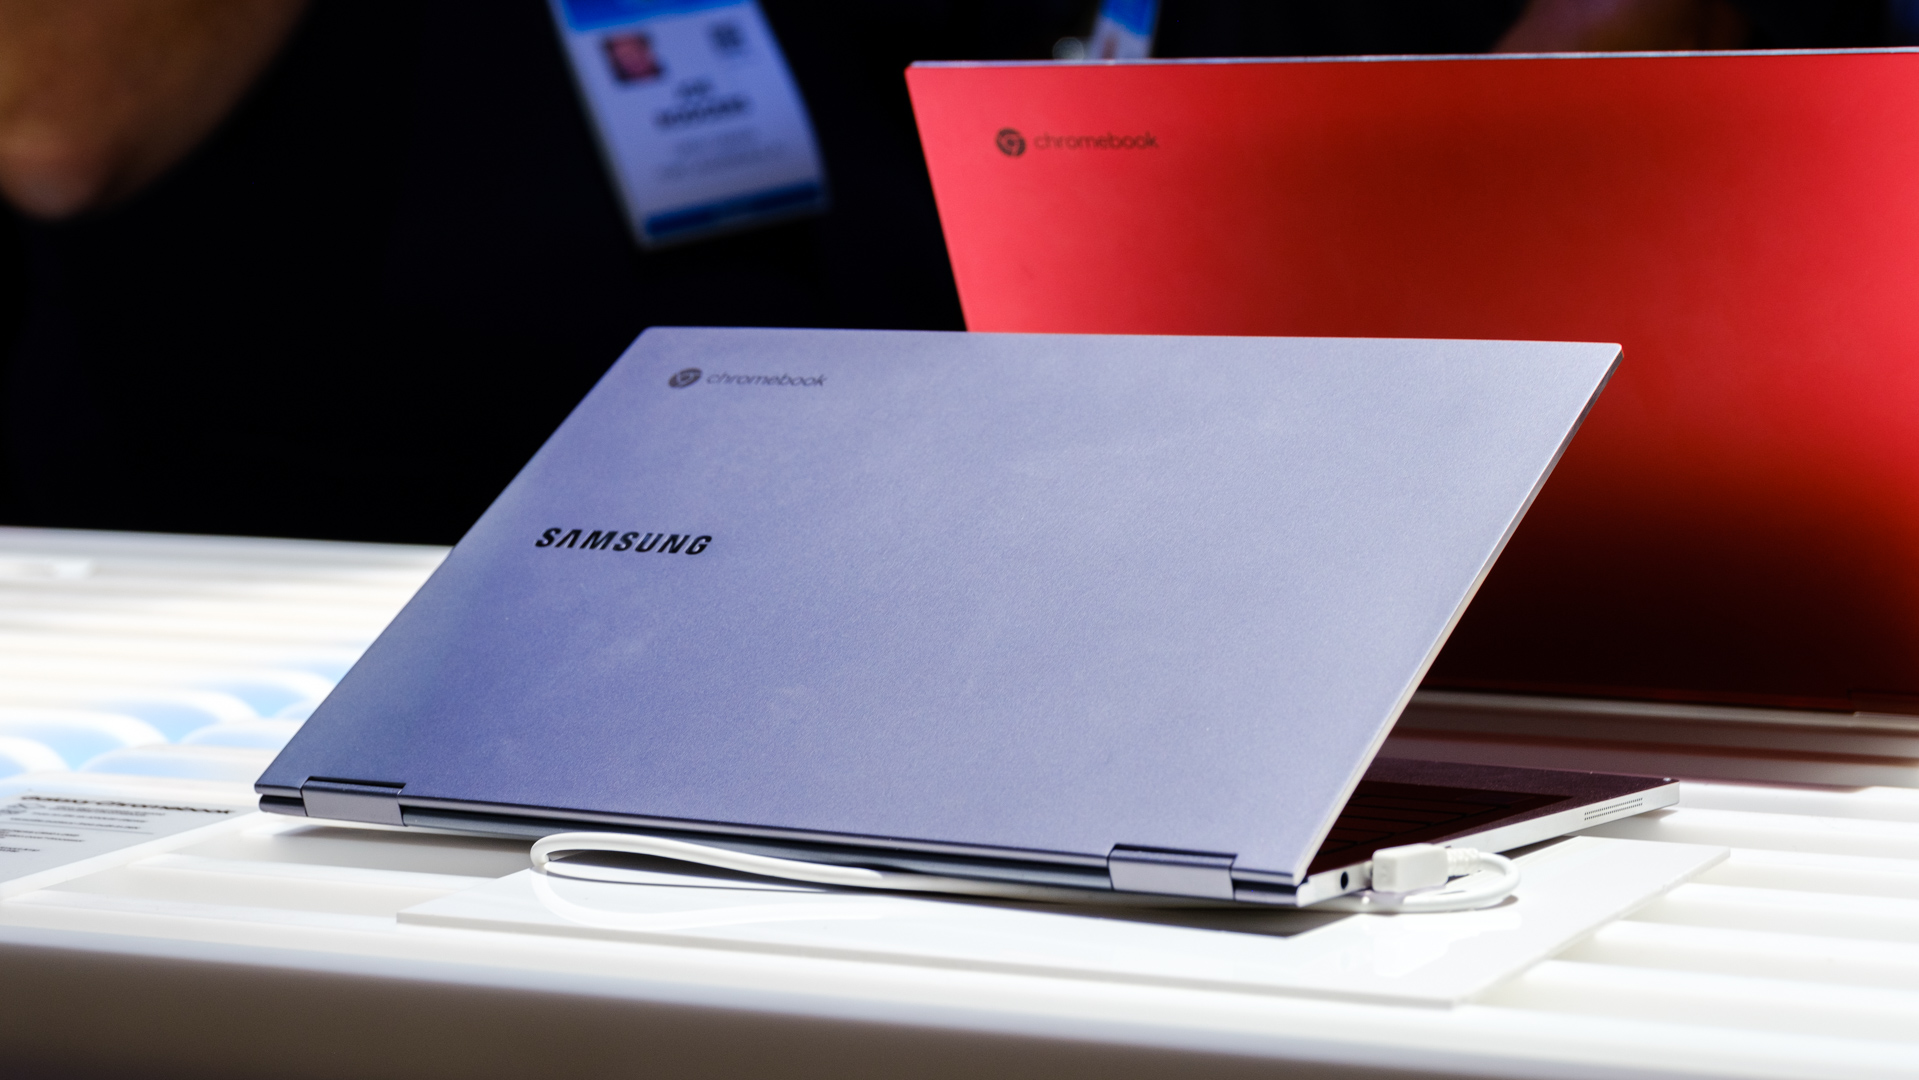 Samsung Galaxy Chromebook beveled silver on the back